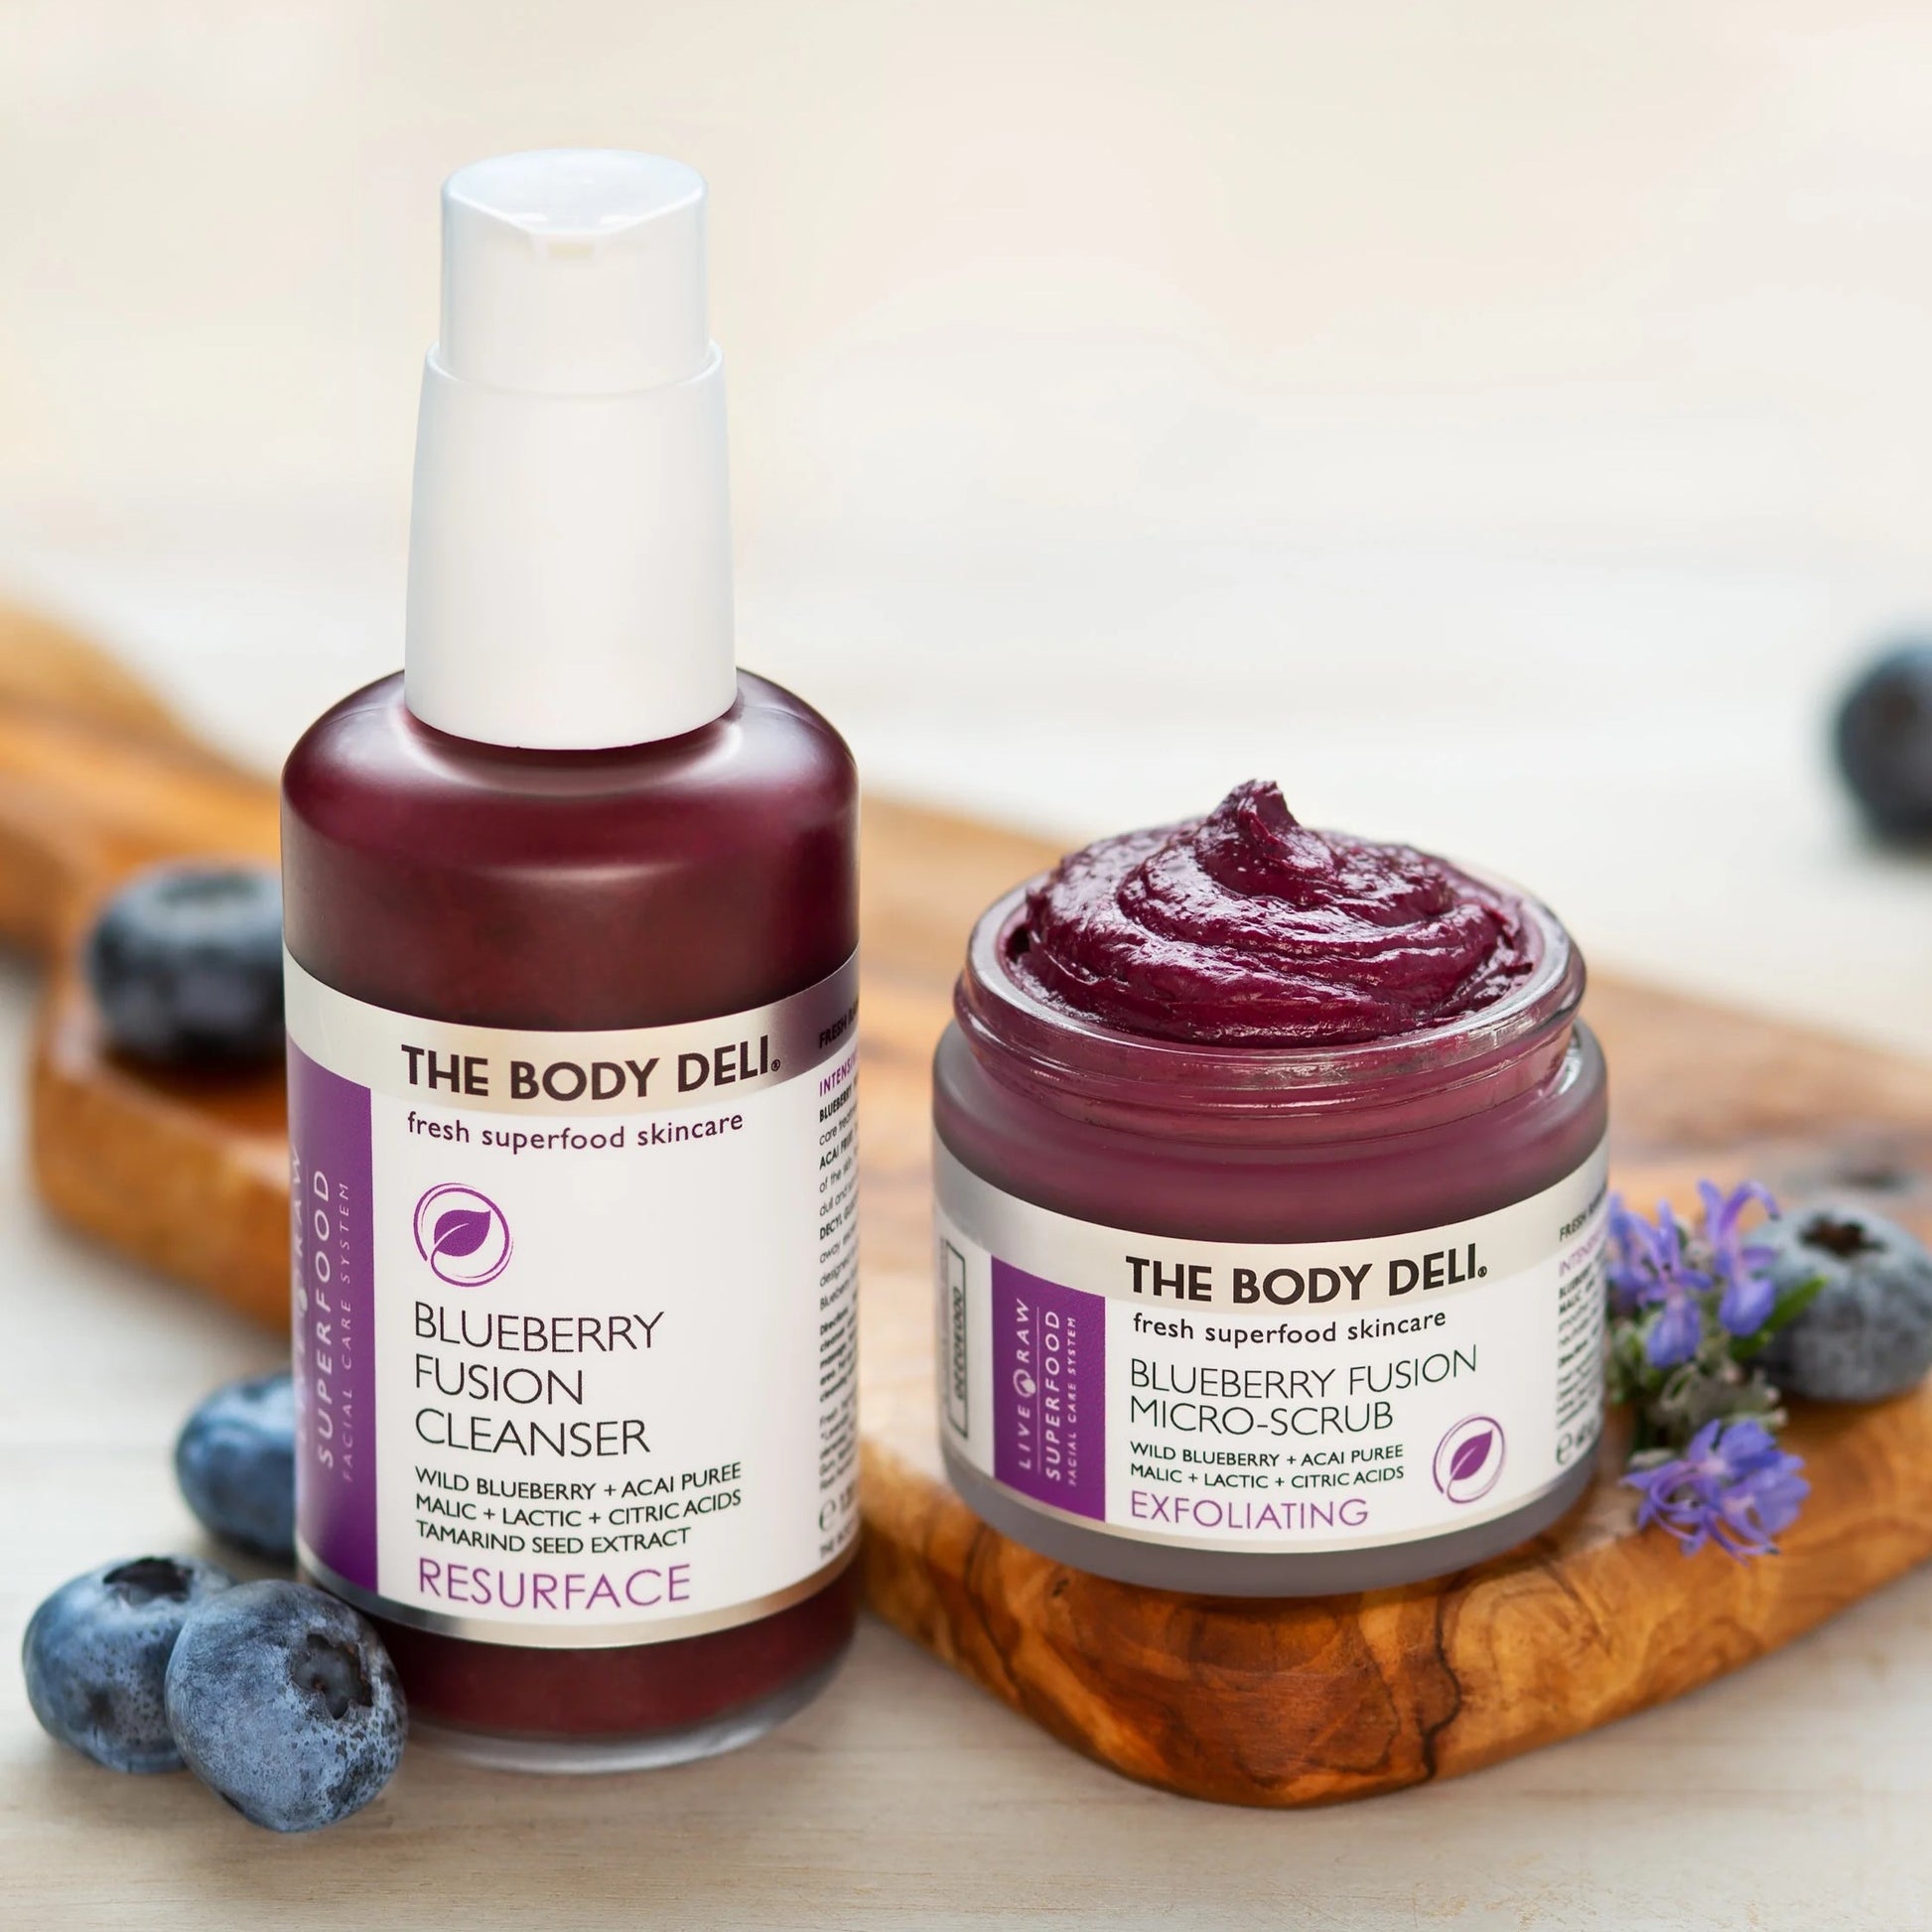 THE BODY DELI The Blueberry Collection